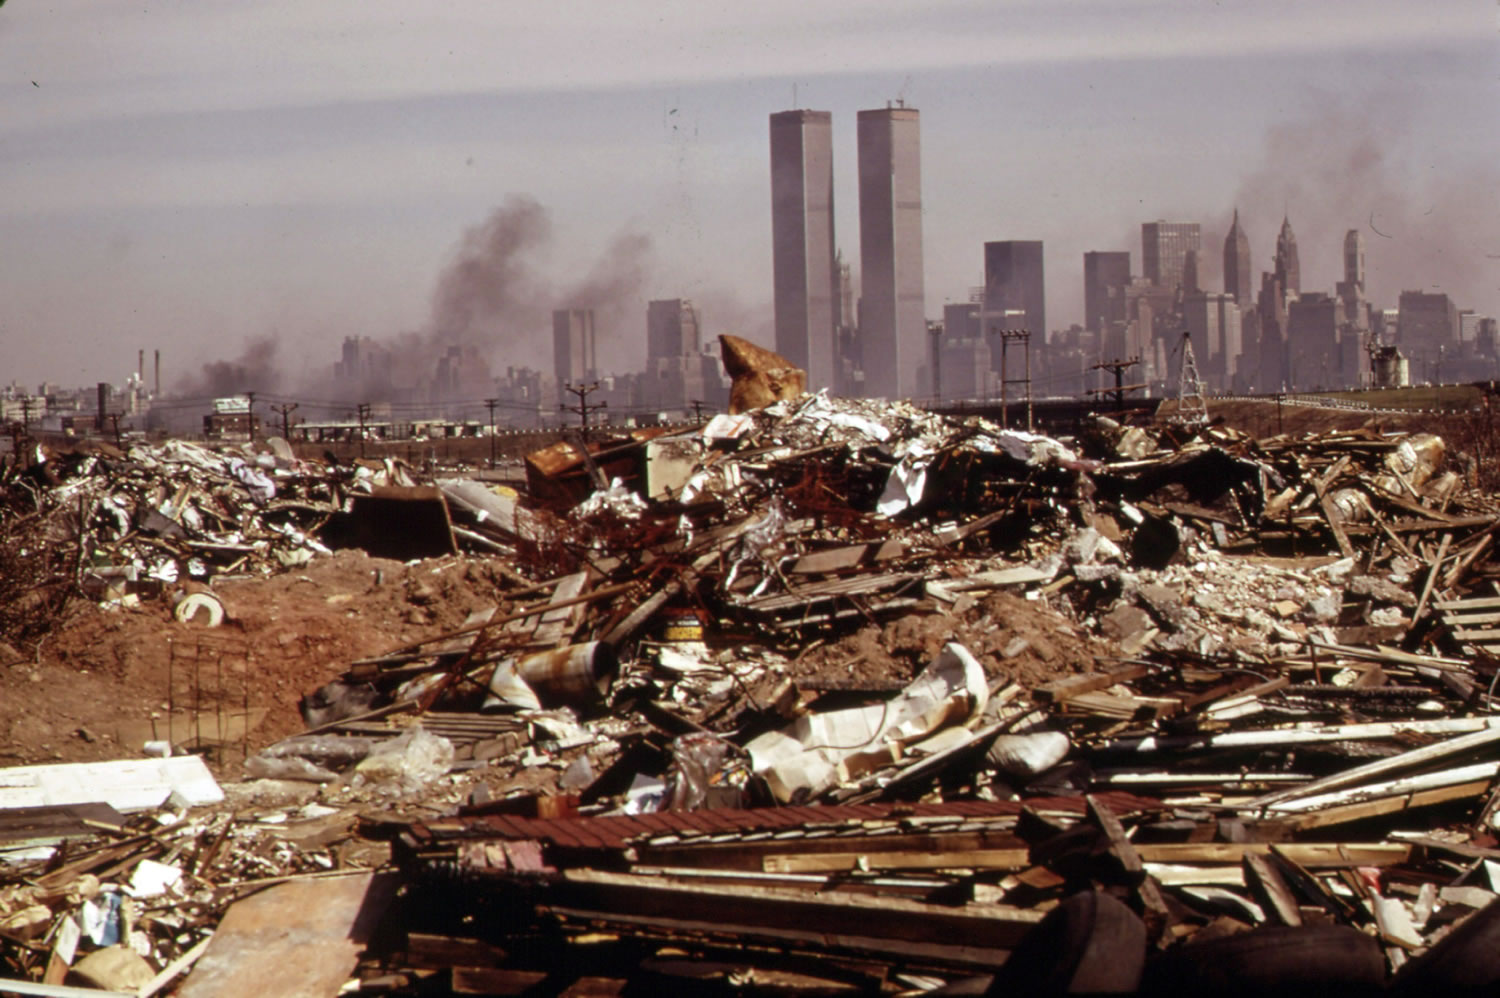 An illegal dumping area off the New Jersey Turnpike, facing Manhattan across the Hudson River, and north of the land fill area, seen March 1970, became Liberty State Park, N.J.